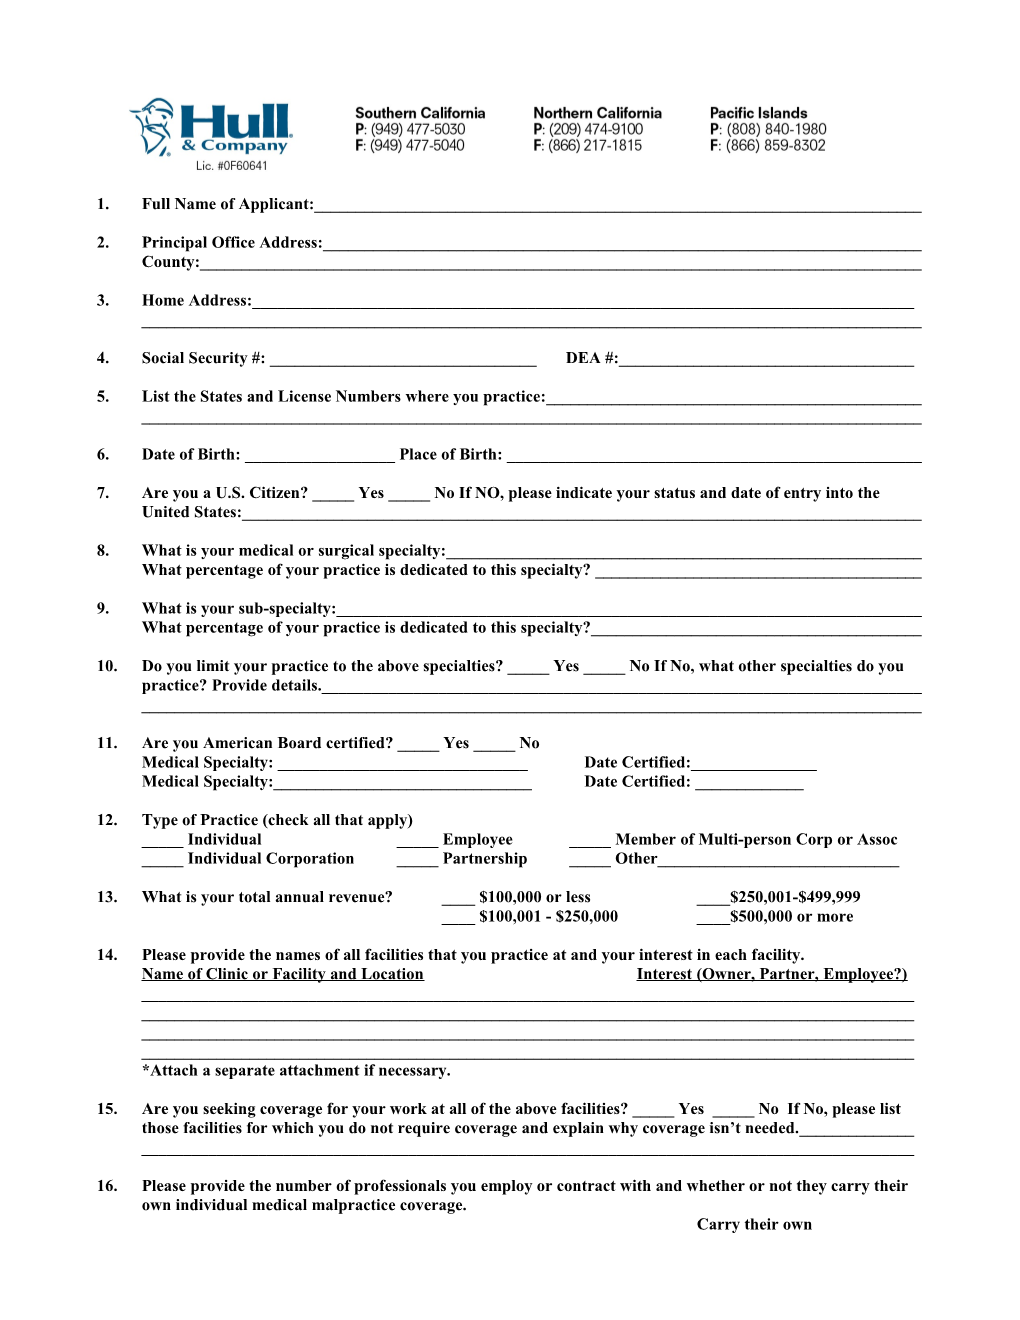 Physicians and Surgeons Professional Liability Application